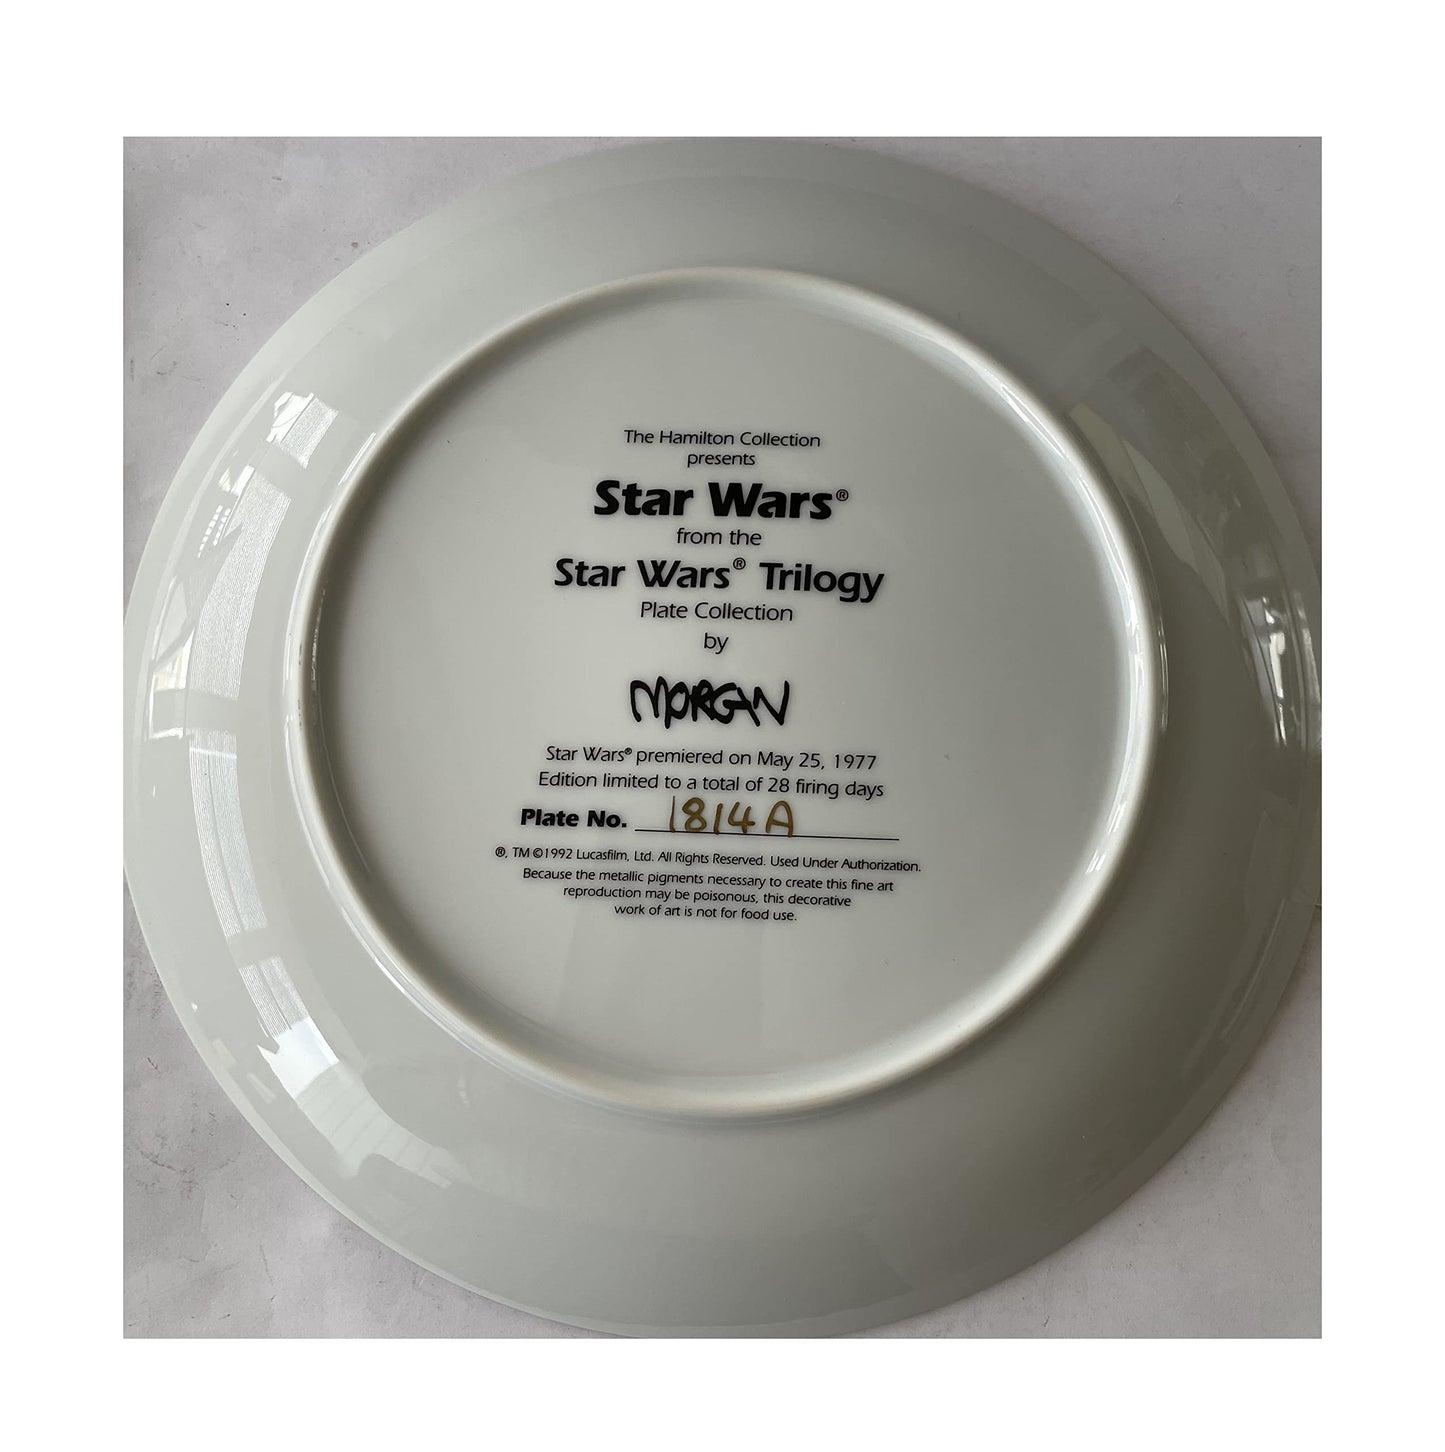 Vintage 1993 Star Wars Trilogy - A New Hope Montage- Hamilton Collection Limited Edition Collectors Plate With Certificate Of Authenticity - Brand New Shop Stock Room Find